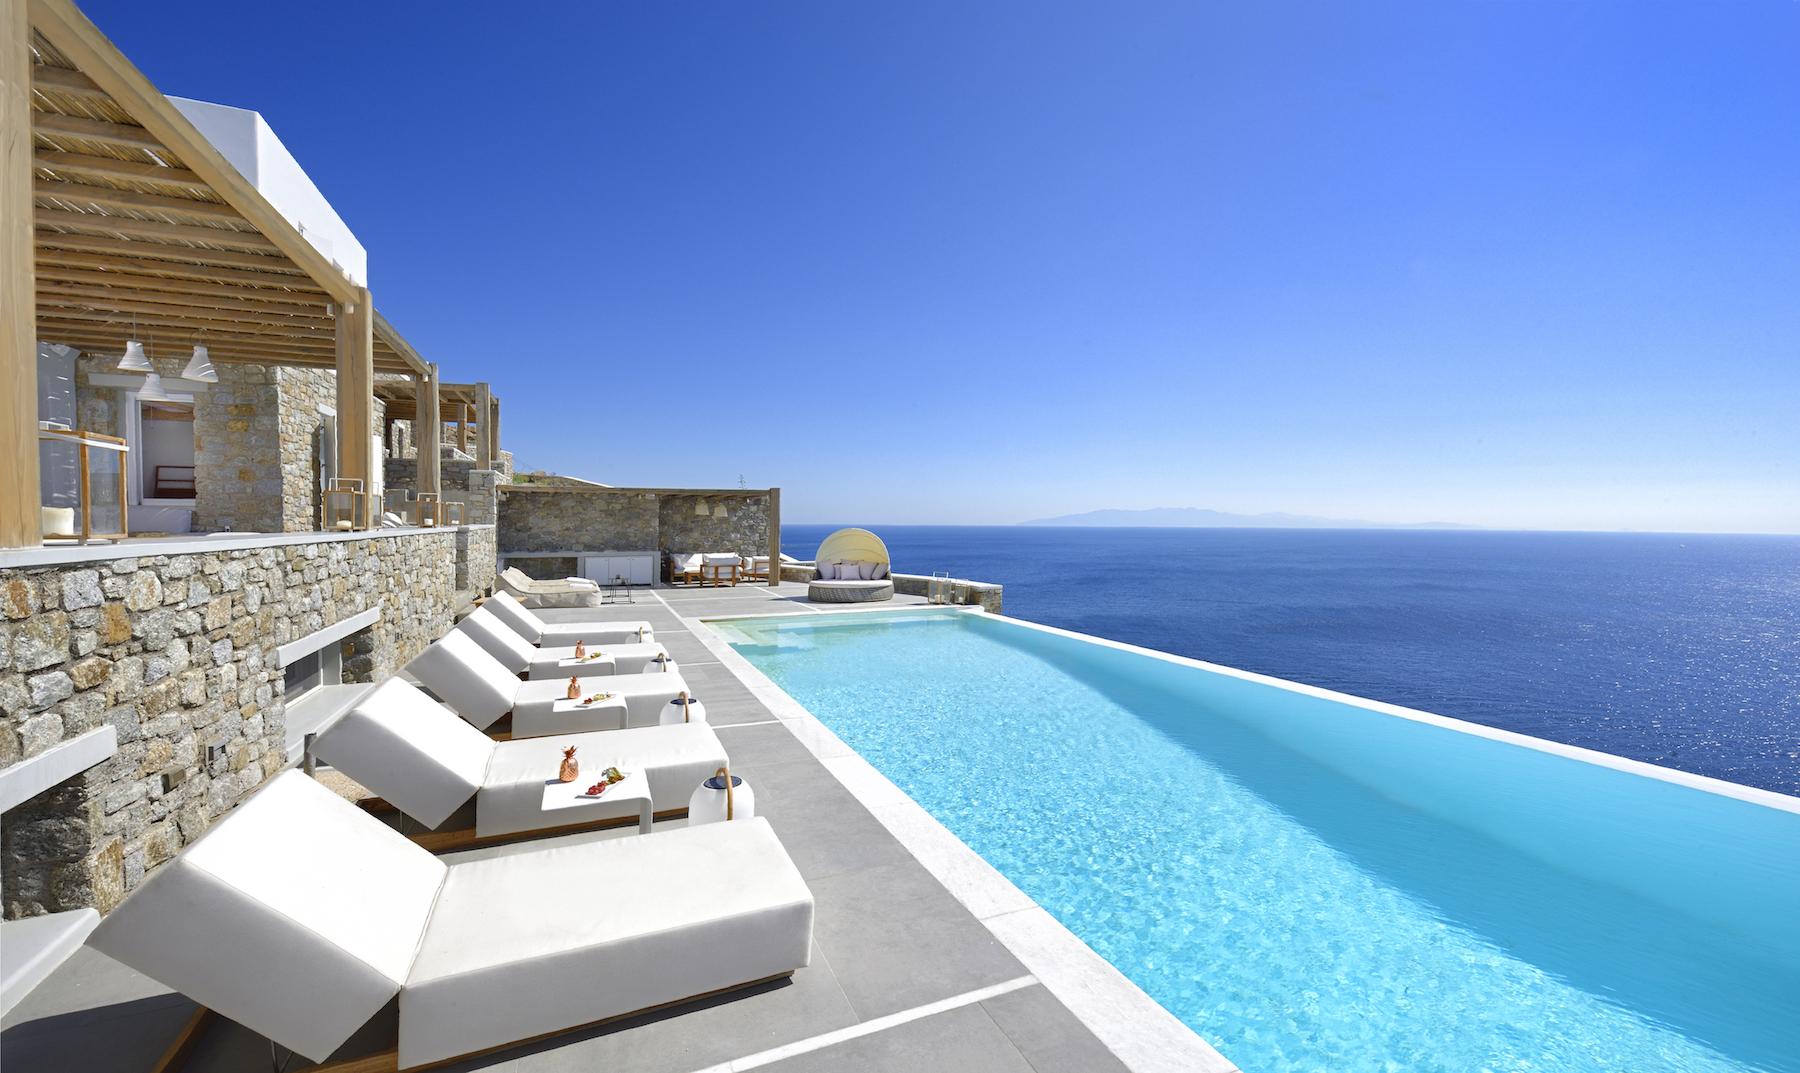 Into The Blue: A Seaside Retreat On The Edge Of Mykonos